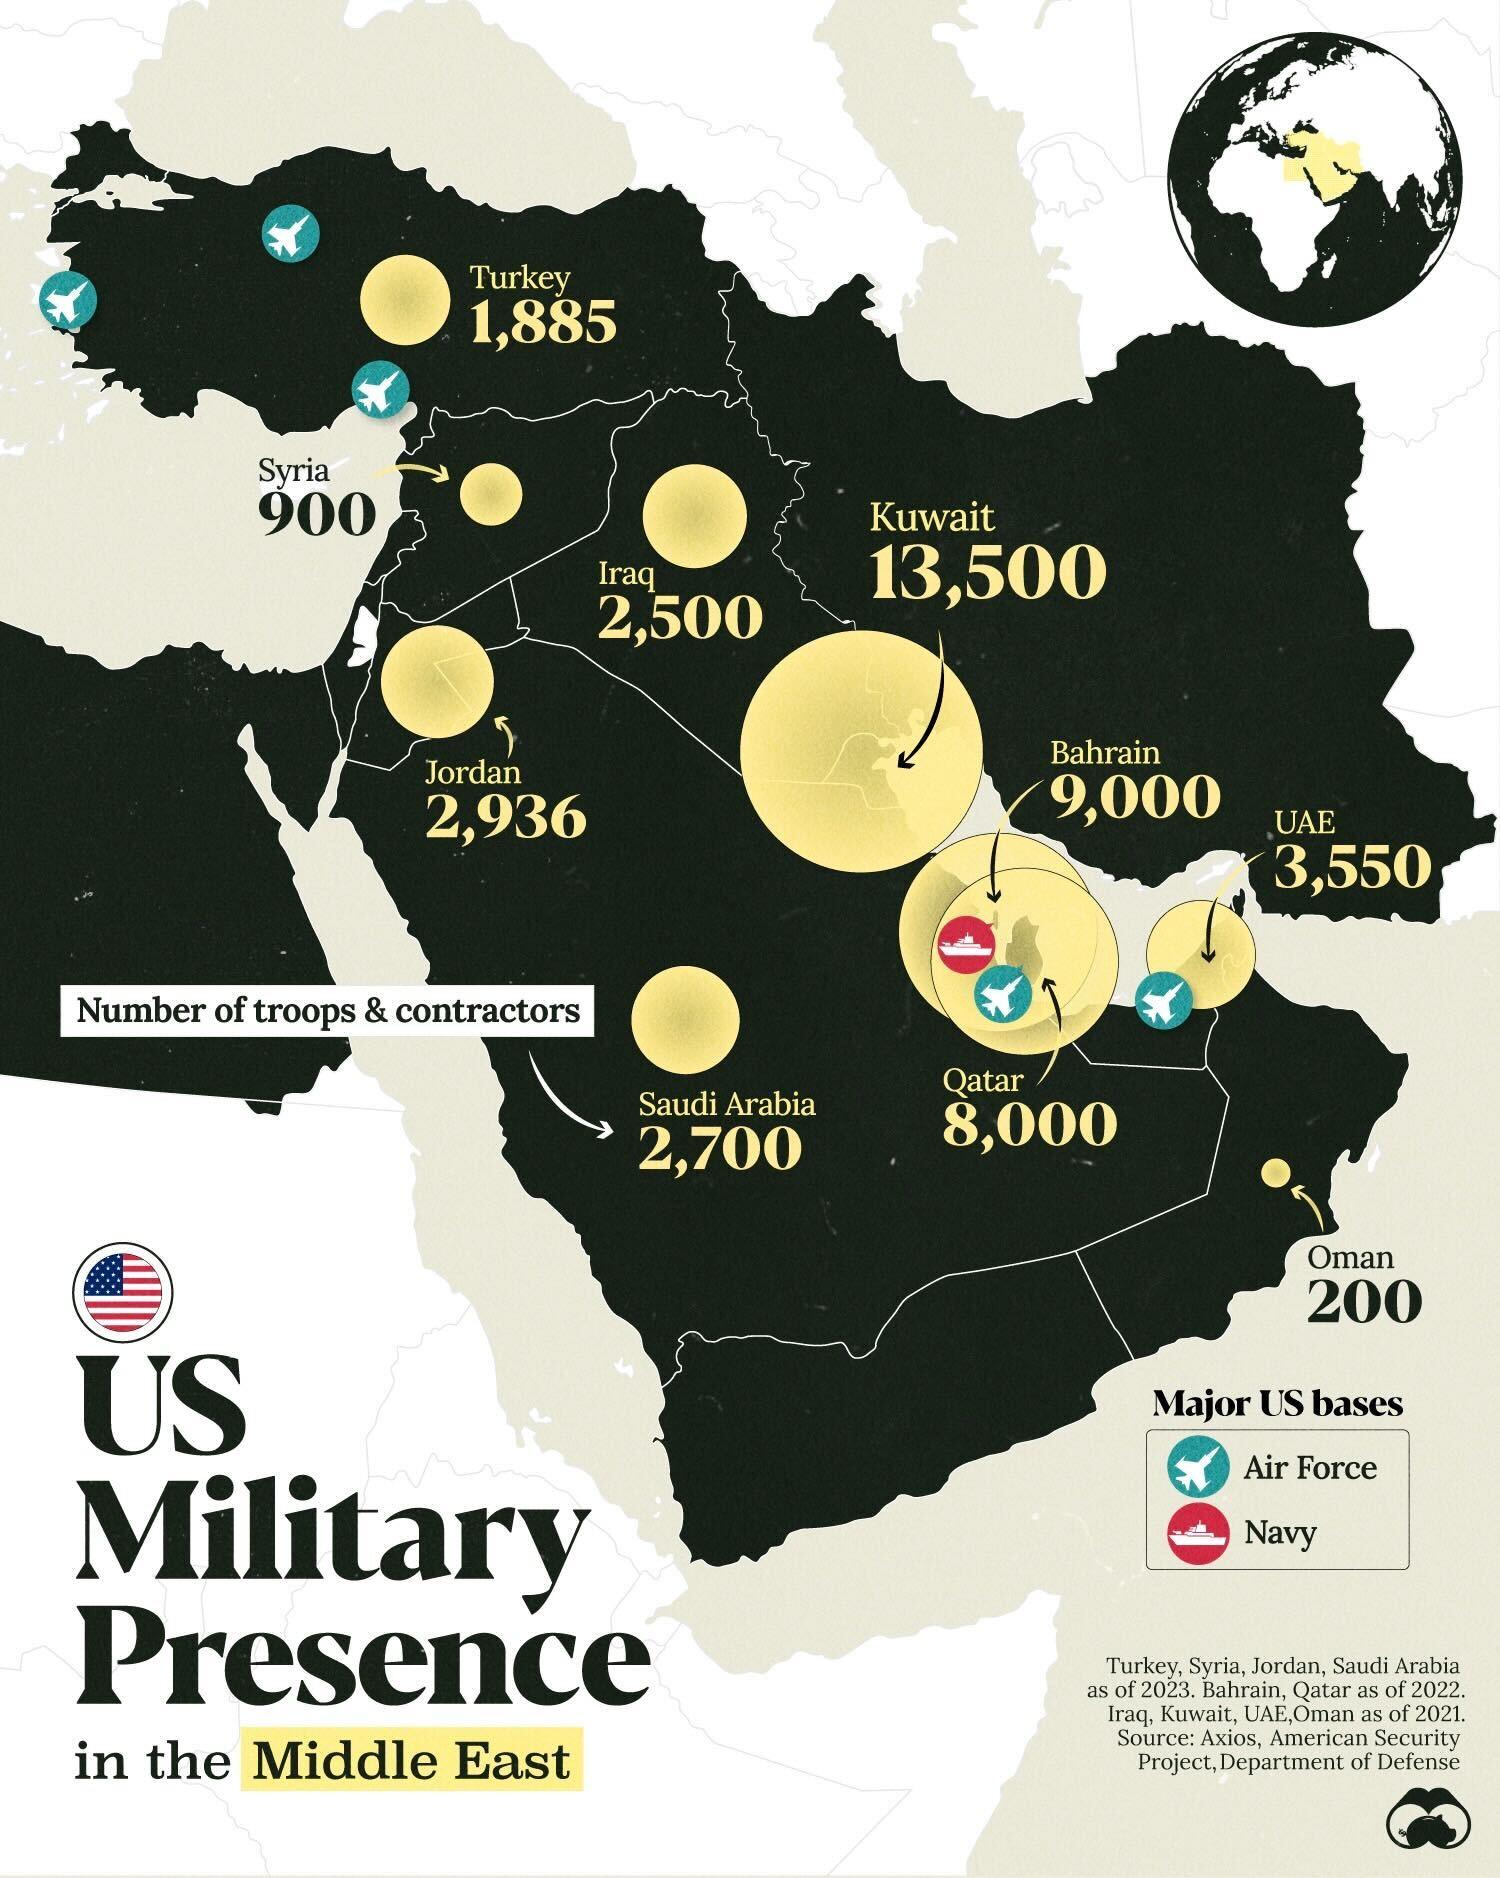 Recent Estimates Suggest the U.S. Has 45,000+ Troops in the Middle East